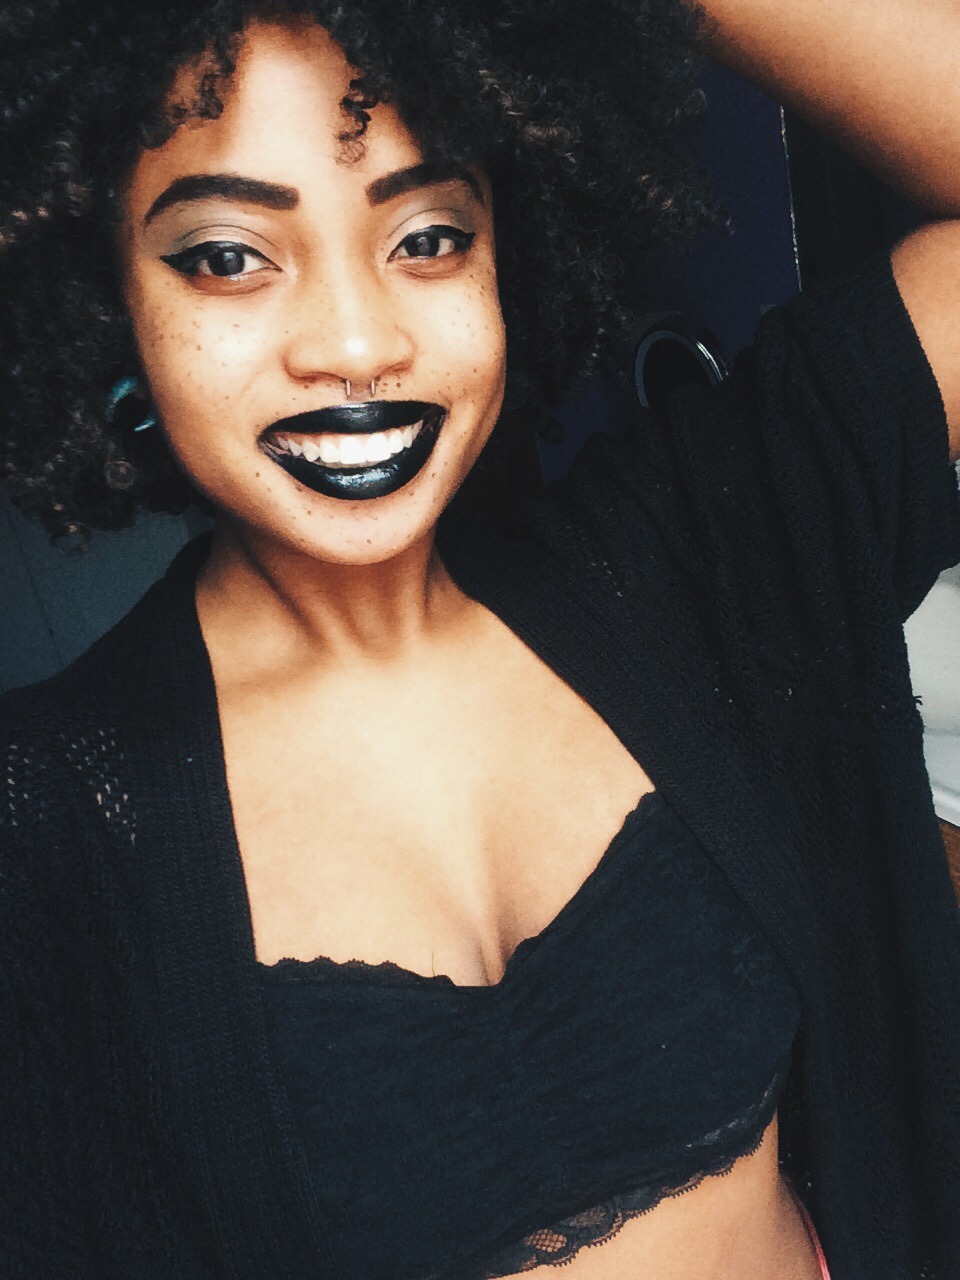 obeykingafrica:All this melanin 🐼They/them pronouns* *Please don’t delete the